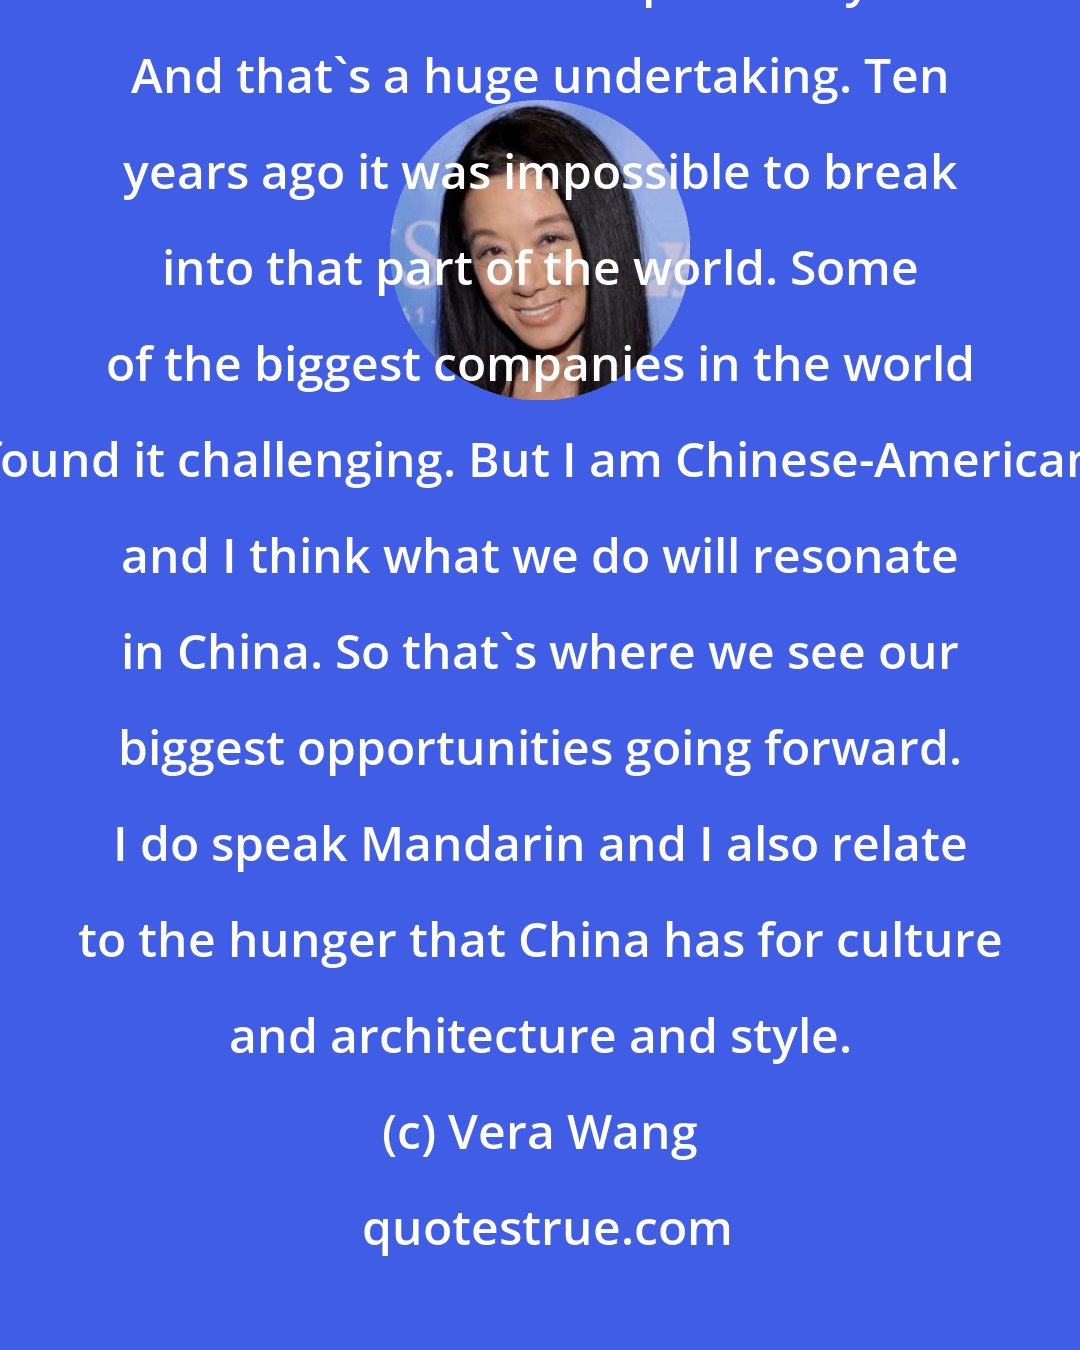 Vera Wang: I think there's going to be a real push in the next two years in Asia - China and Korea specifically. And that's a huge undertaking. Ten years ago it was impossible to break into that part of the world. Some of the biggest companies in the world found it challenging. But I am Chinese-American and I think what we do will resonate in China. So that's where we see our biggest opportunities going forward. I do speak Mandarin and I also relate to the hunger that China has for culture and architecture and style.